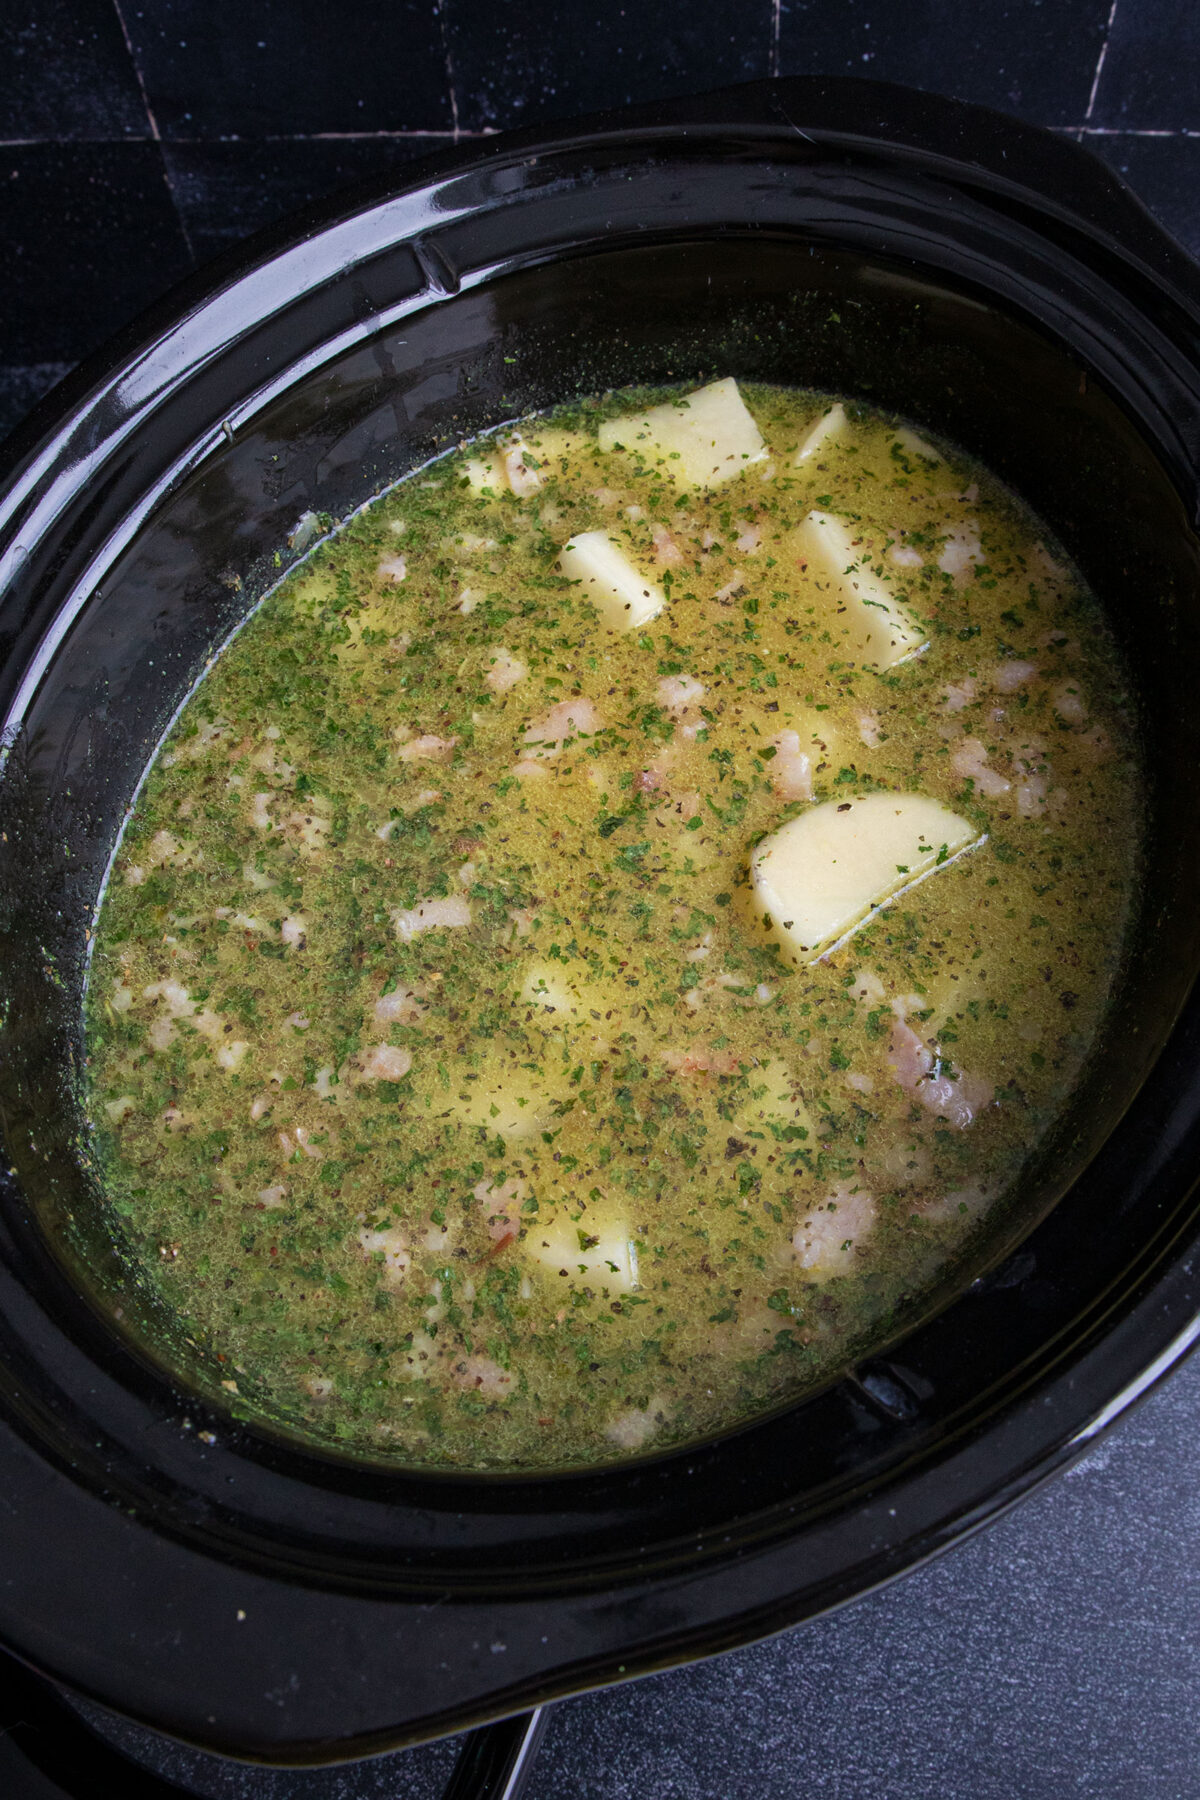 potatoes, spices, bacon and broth in a slow cooker ready to cook